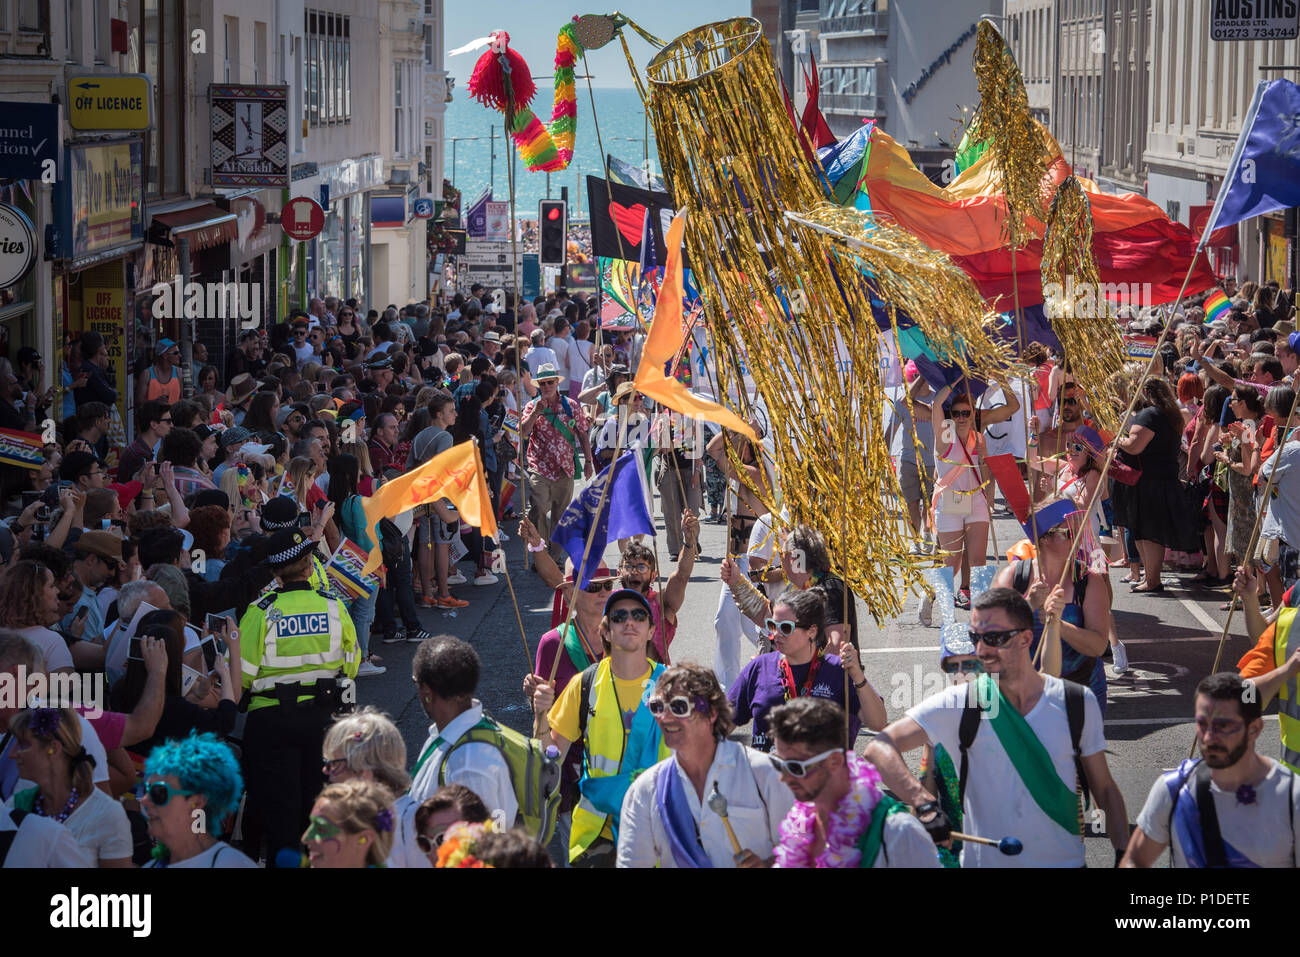 Brighton, East Sussex, August 6th, 2016. Thousands of people line the streets of Brighton to help celebrate the biggest Pride Festival in the UK, with Stock Photo